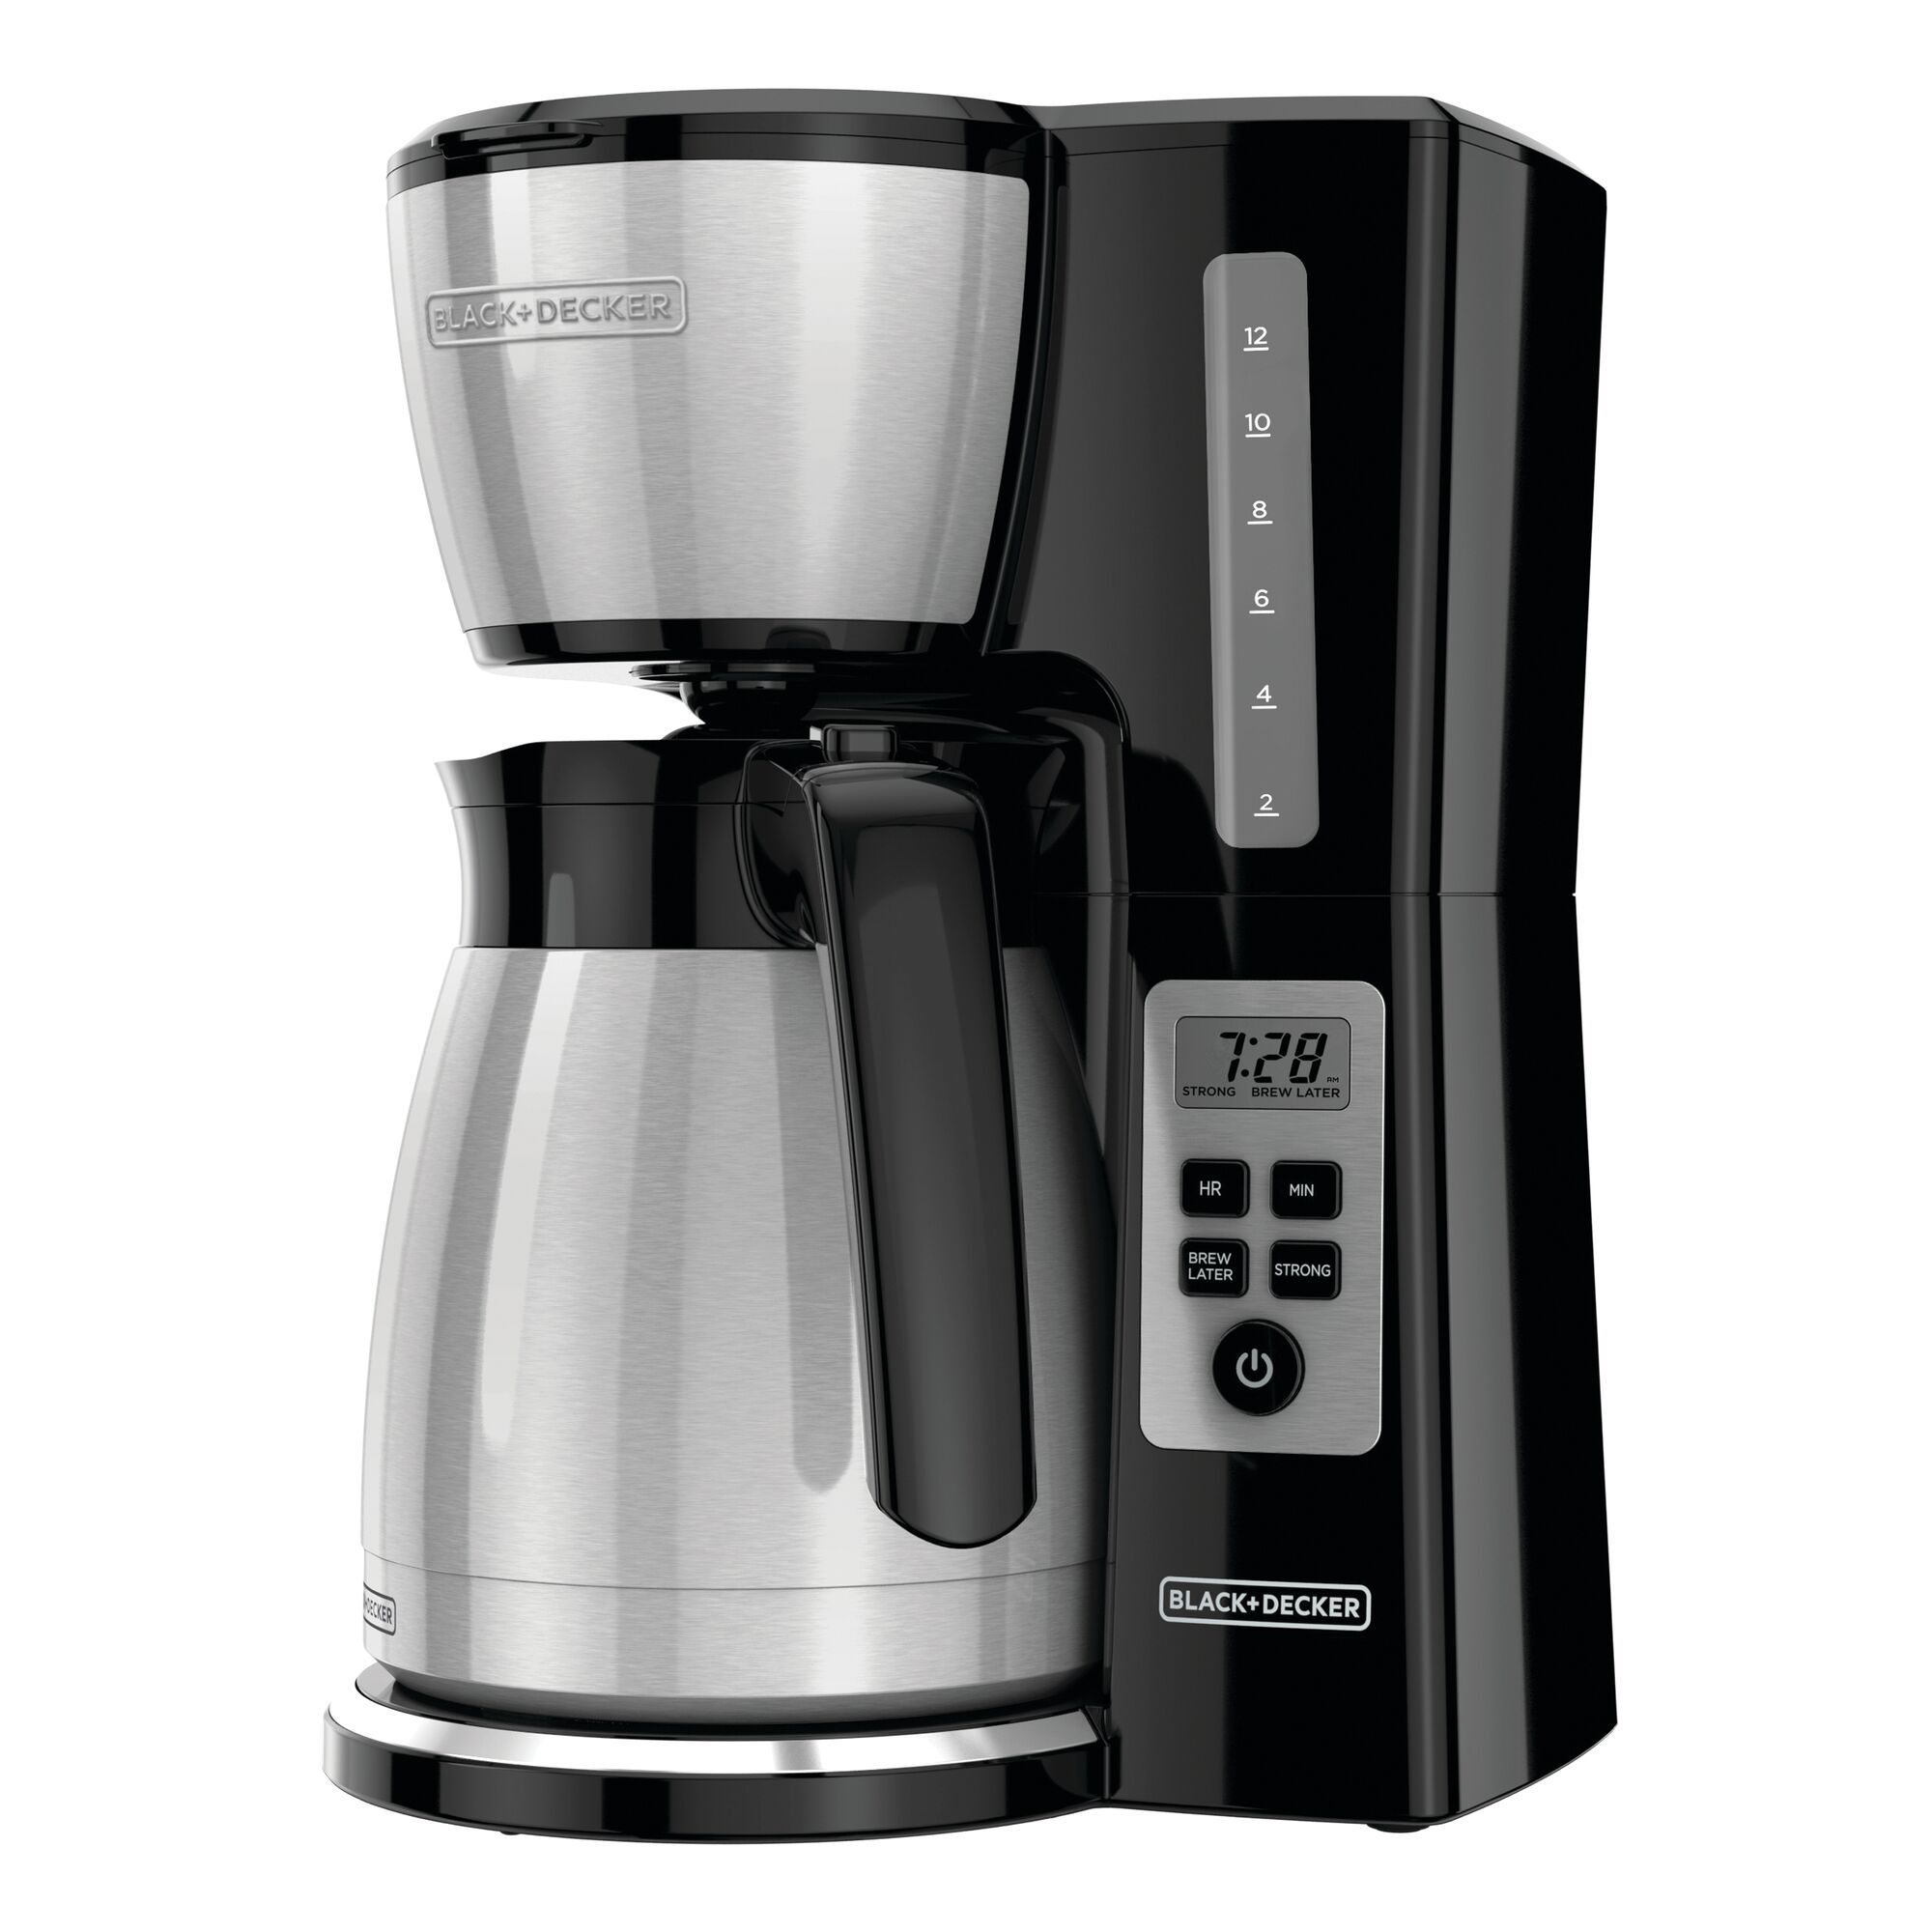 12 Cup Thermal Programmable Coffee maker.